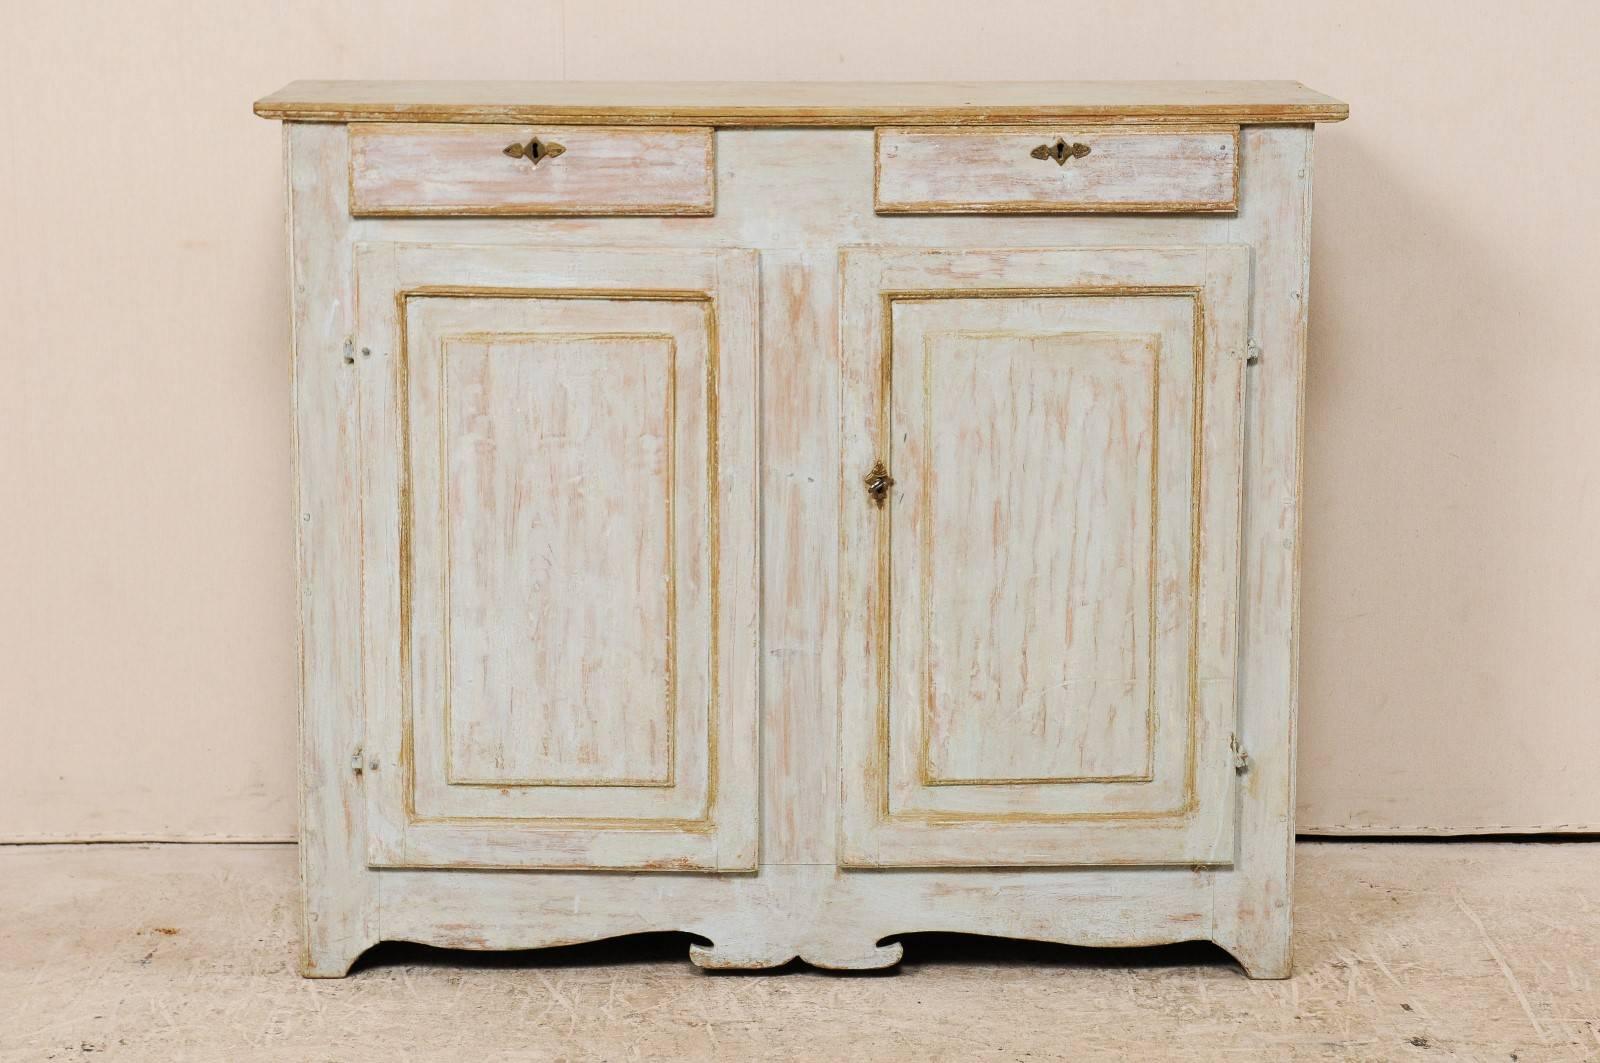 An early 19th century Swedish painted wood cabinet. This antique Karl Johan Swedish cabinet features two drawers over two paneled drawers, with interior shelves behind, and a nicely carved front skirt. The Karl Johan period follows the Gustavian